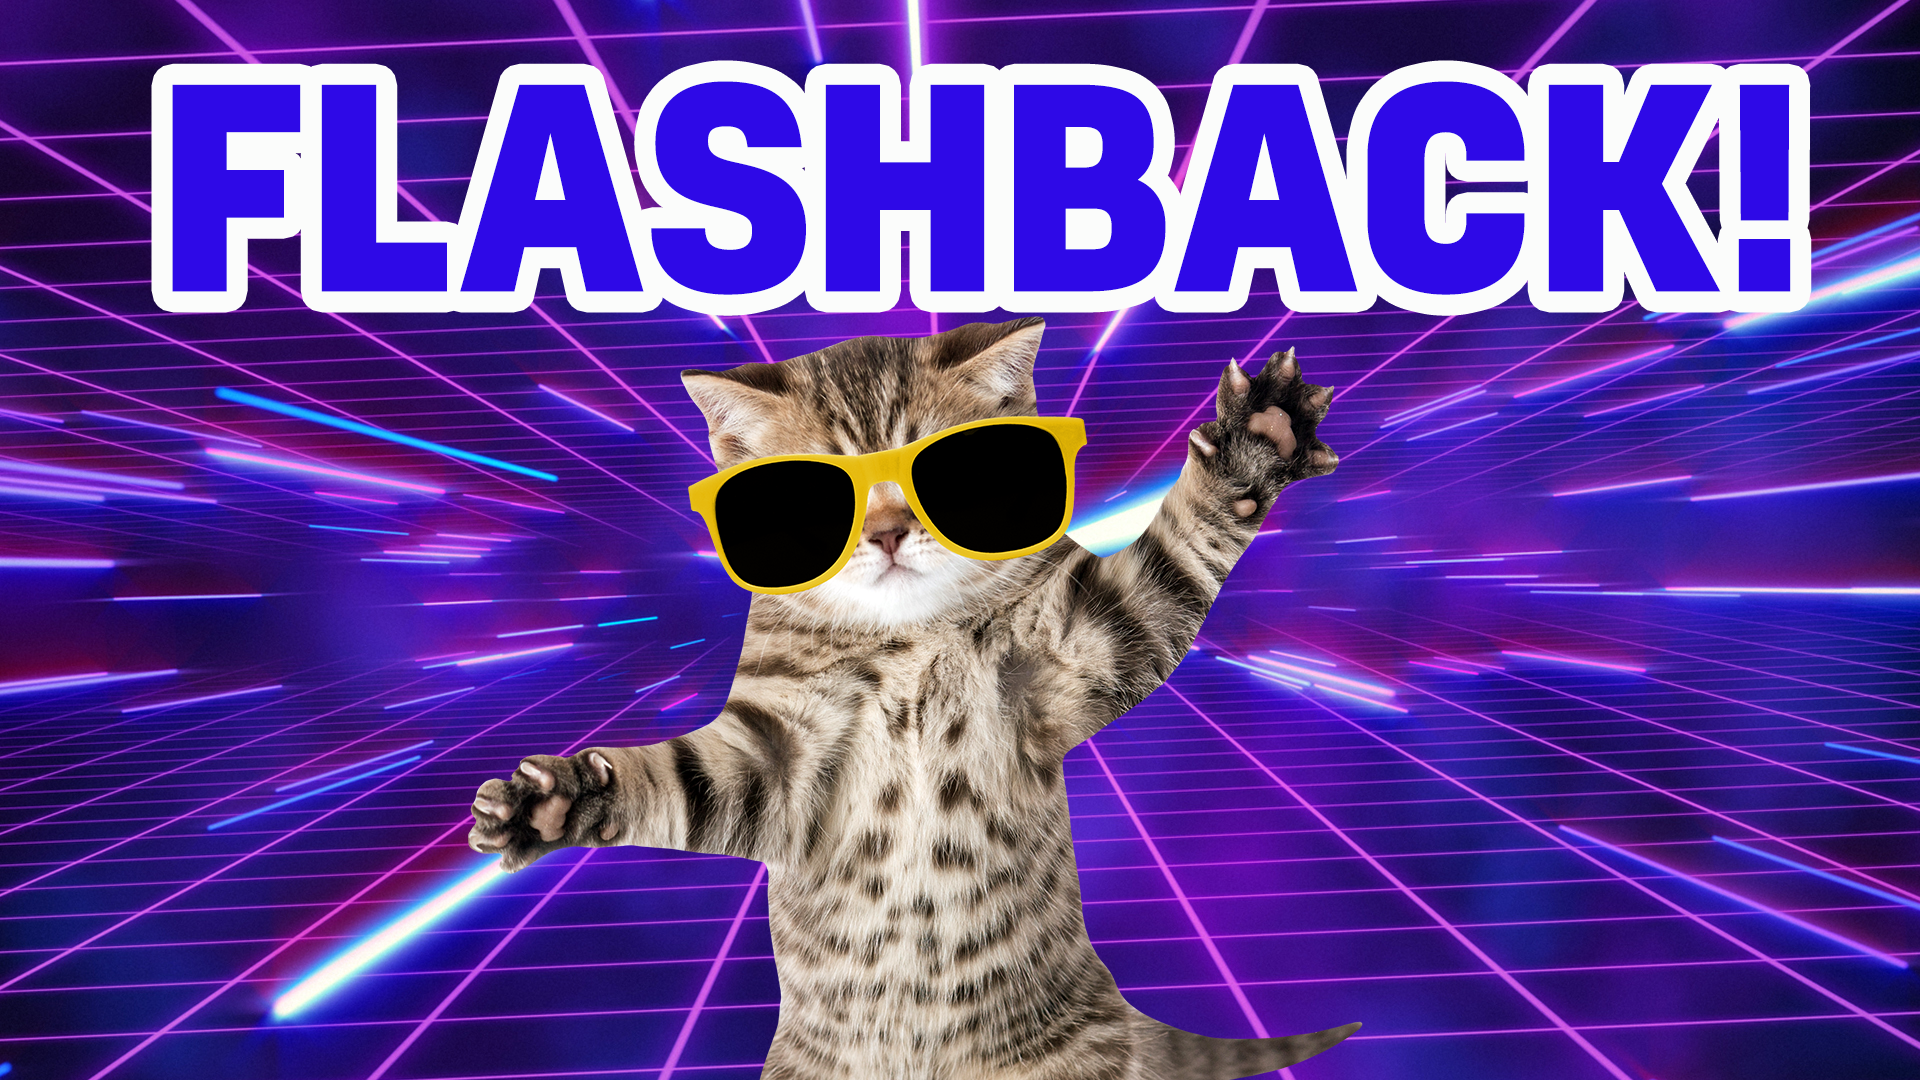 Your track is Flashback! You love anything with lights in it and nothing beats a good disco!